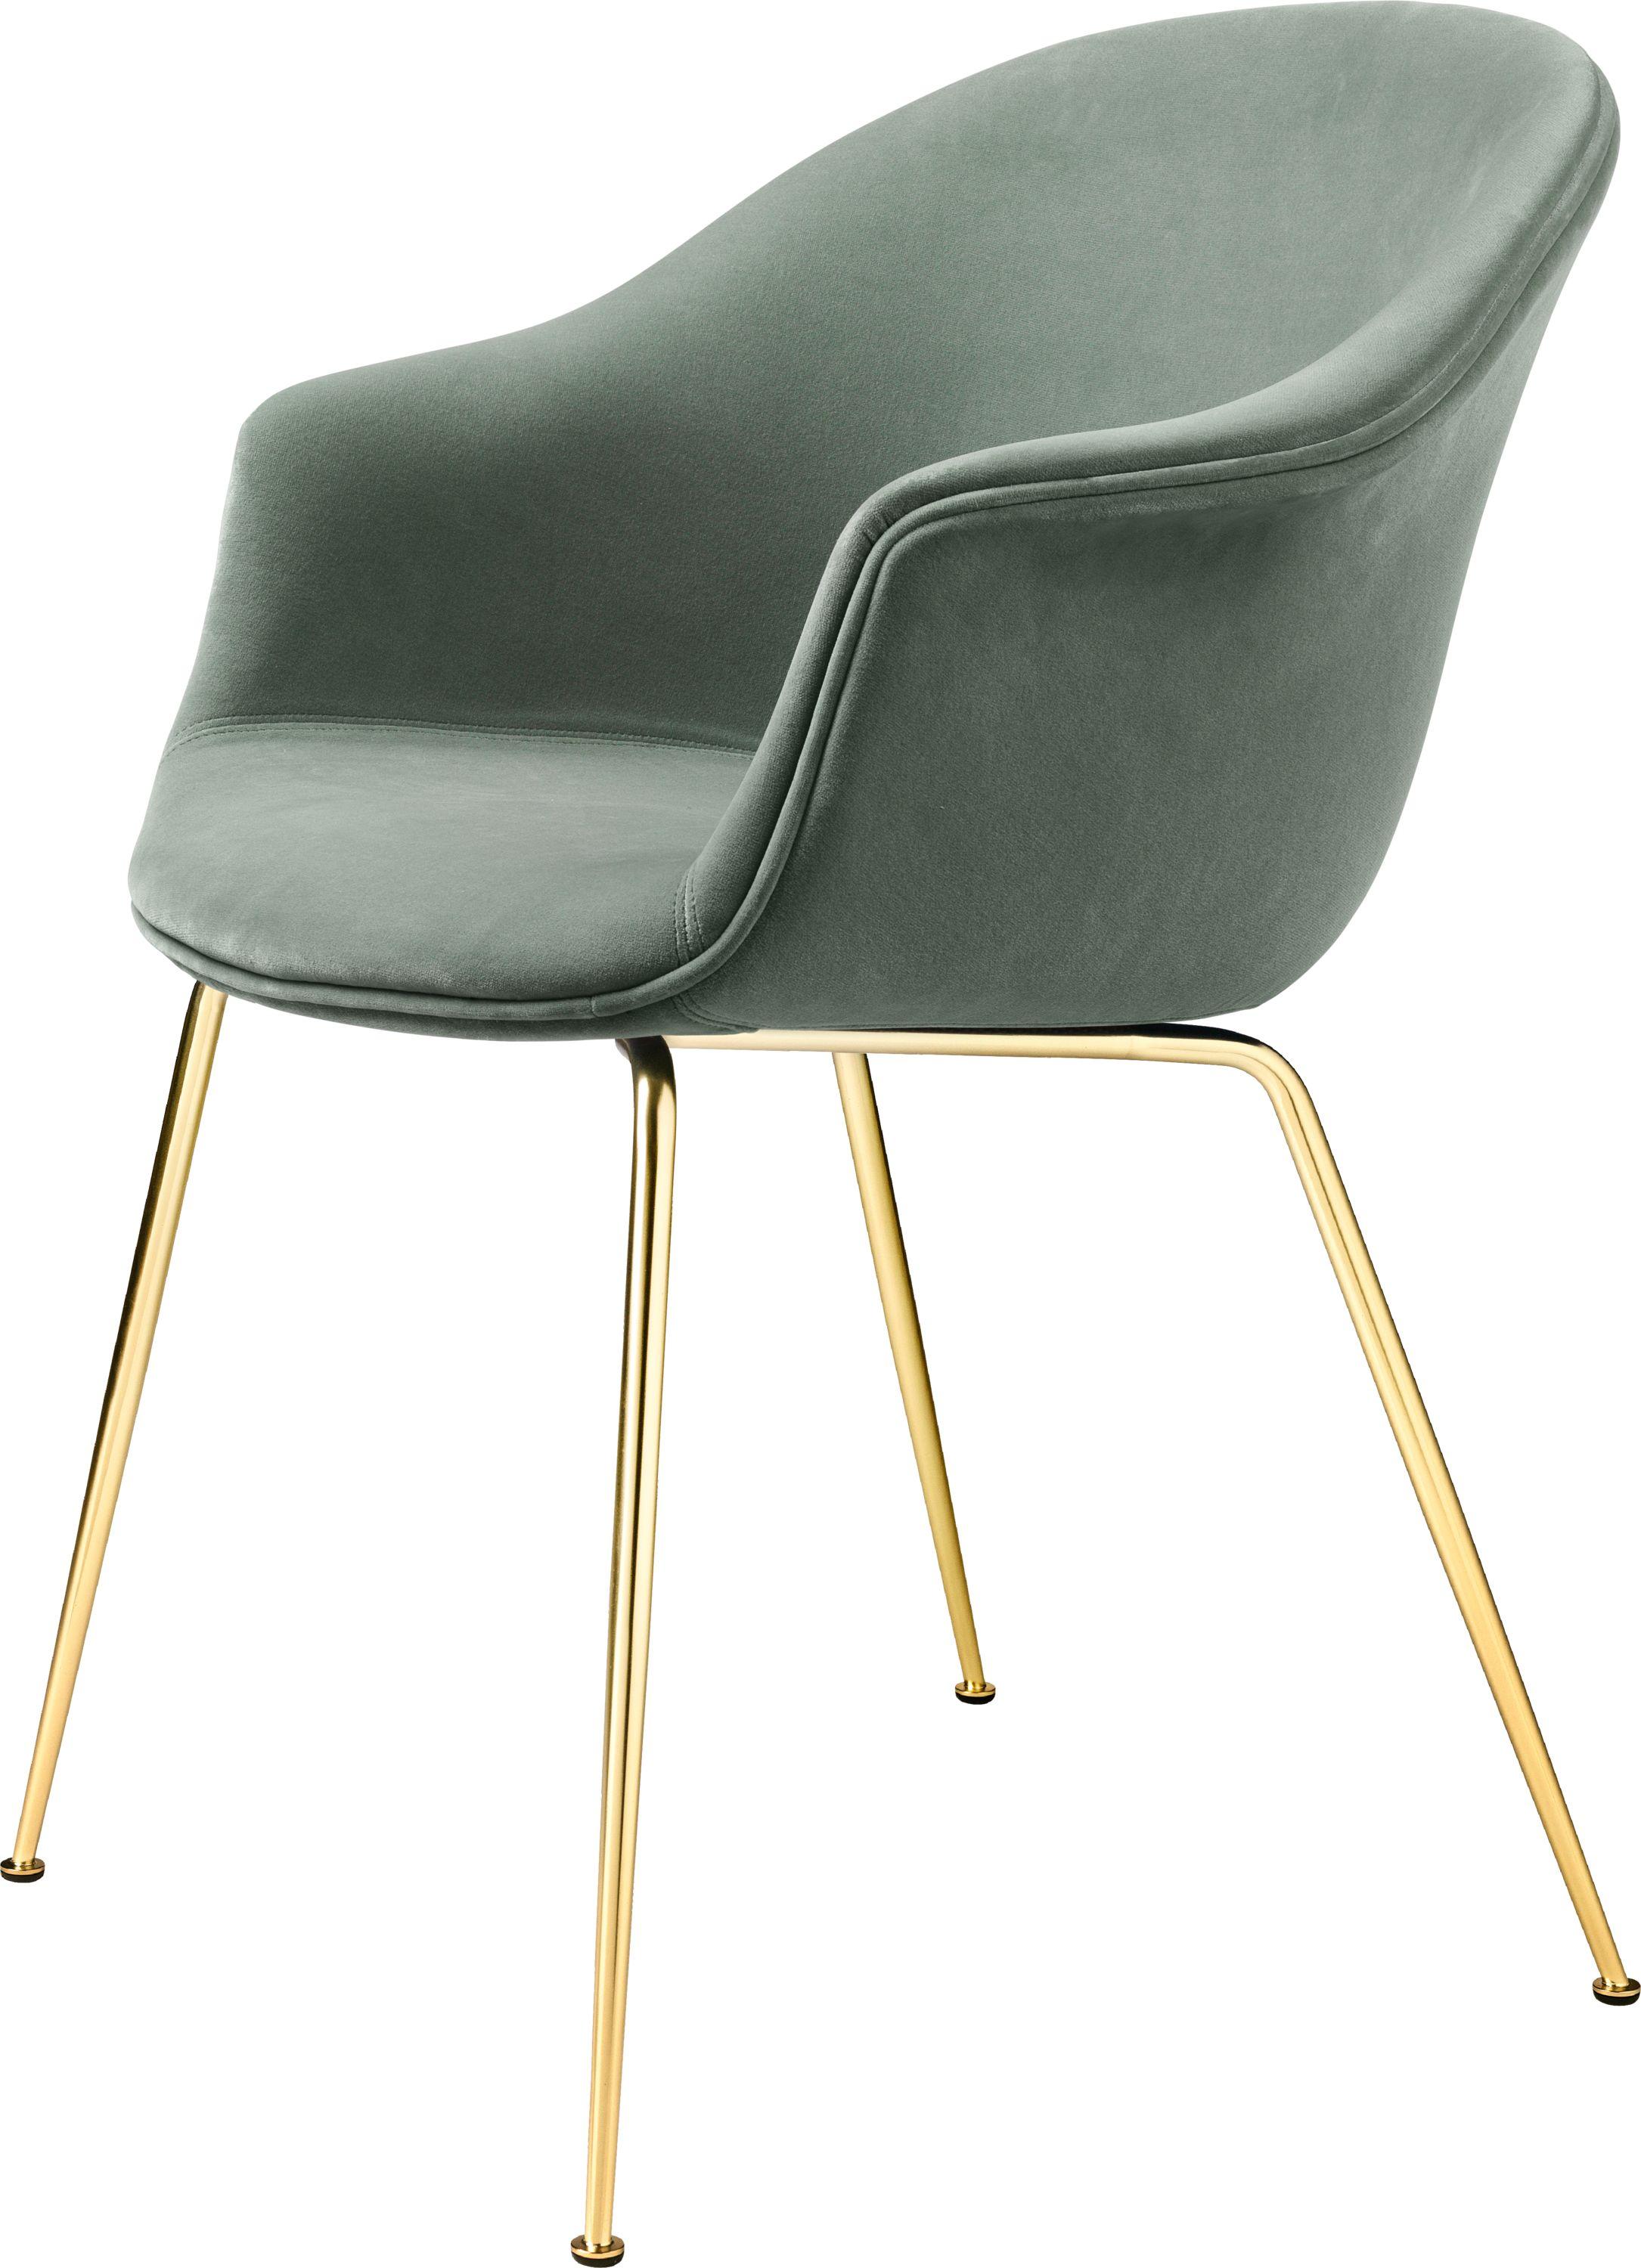 GamFratesi 'Bat' Dining Chair in Green with Antique Brass Conic Base 4